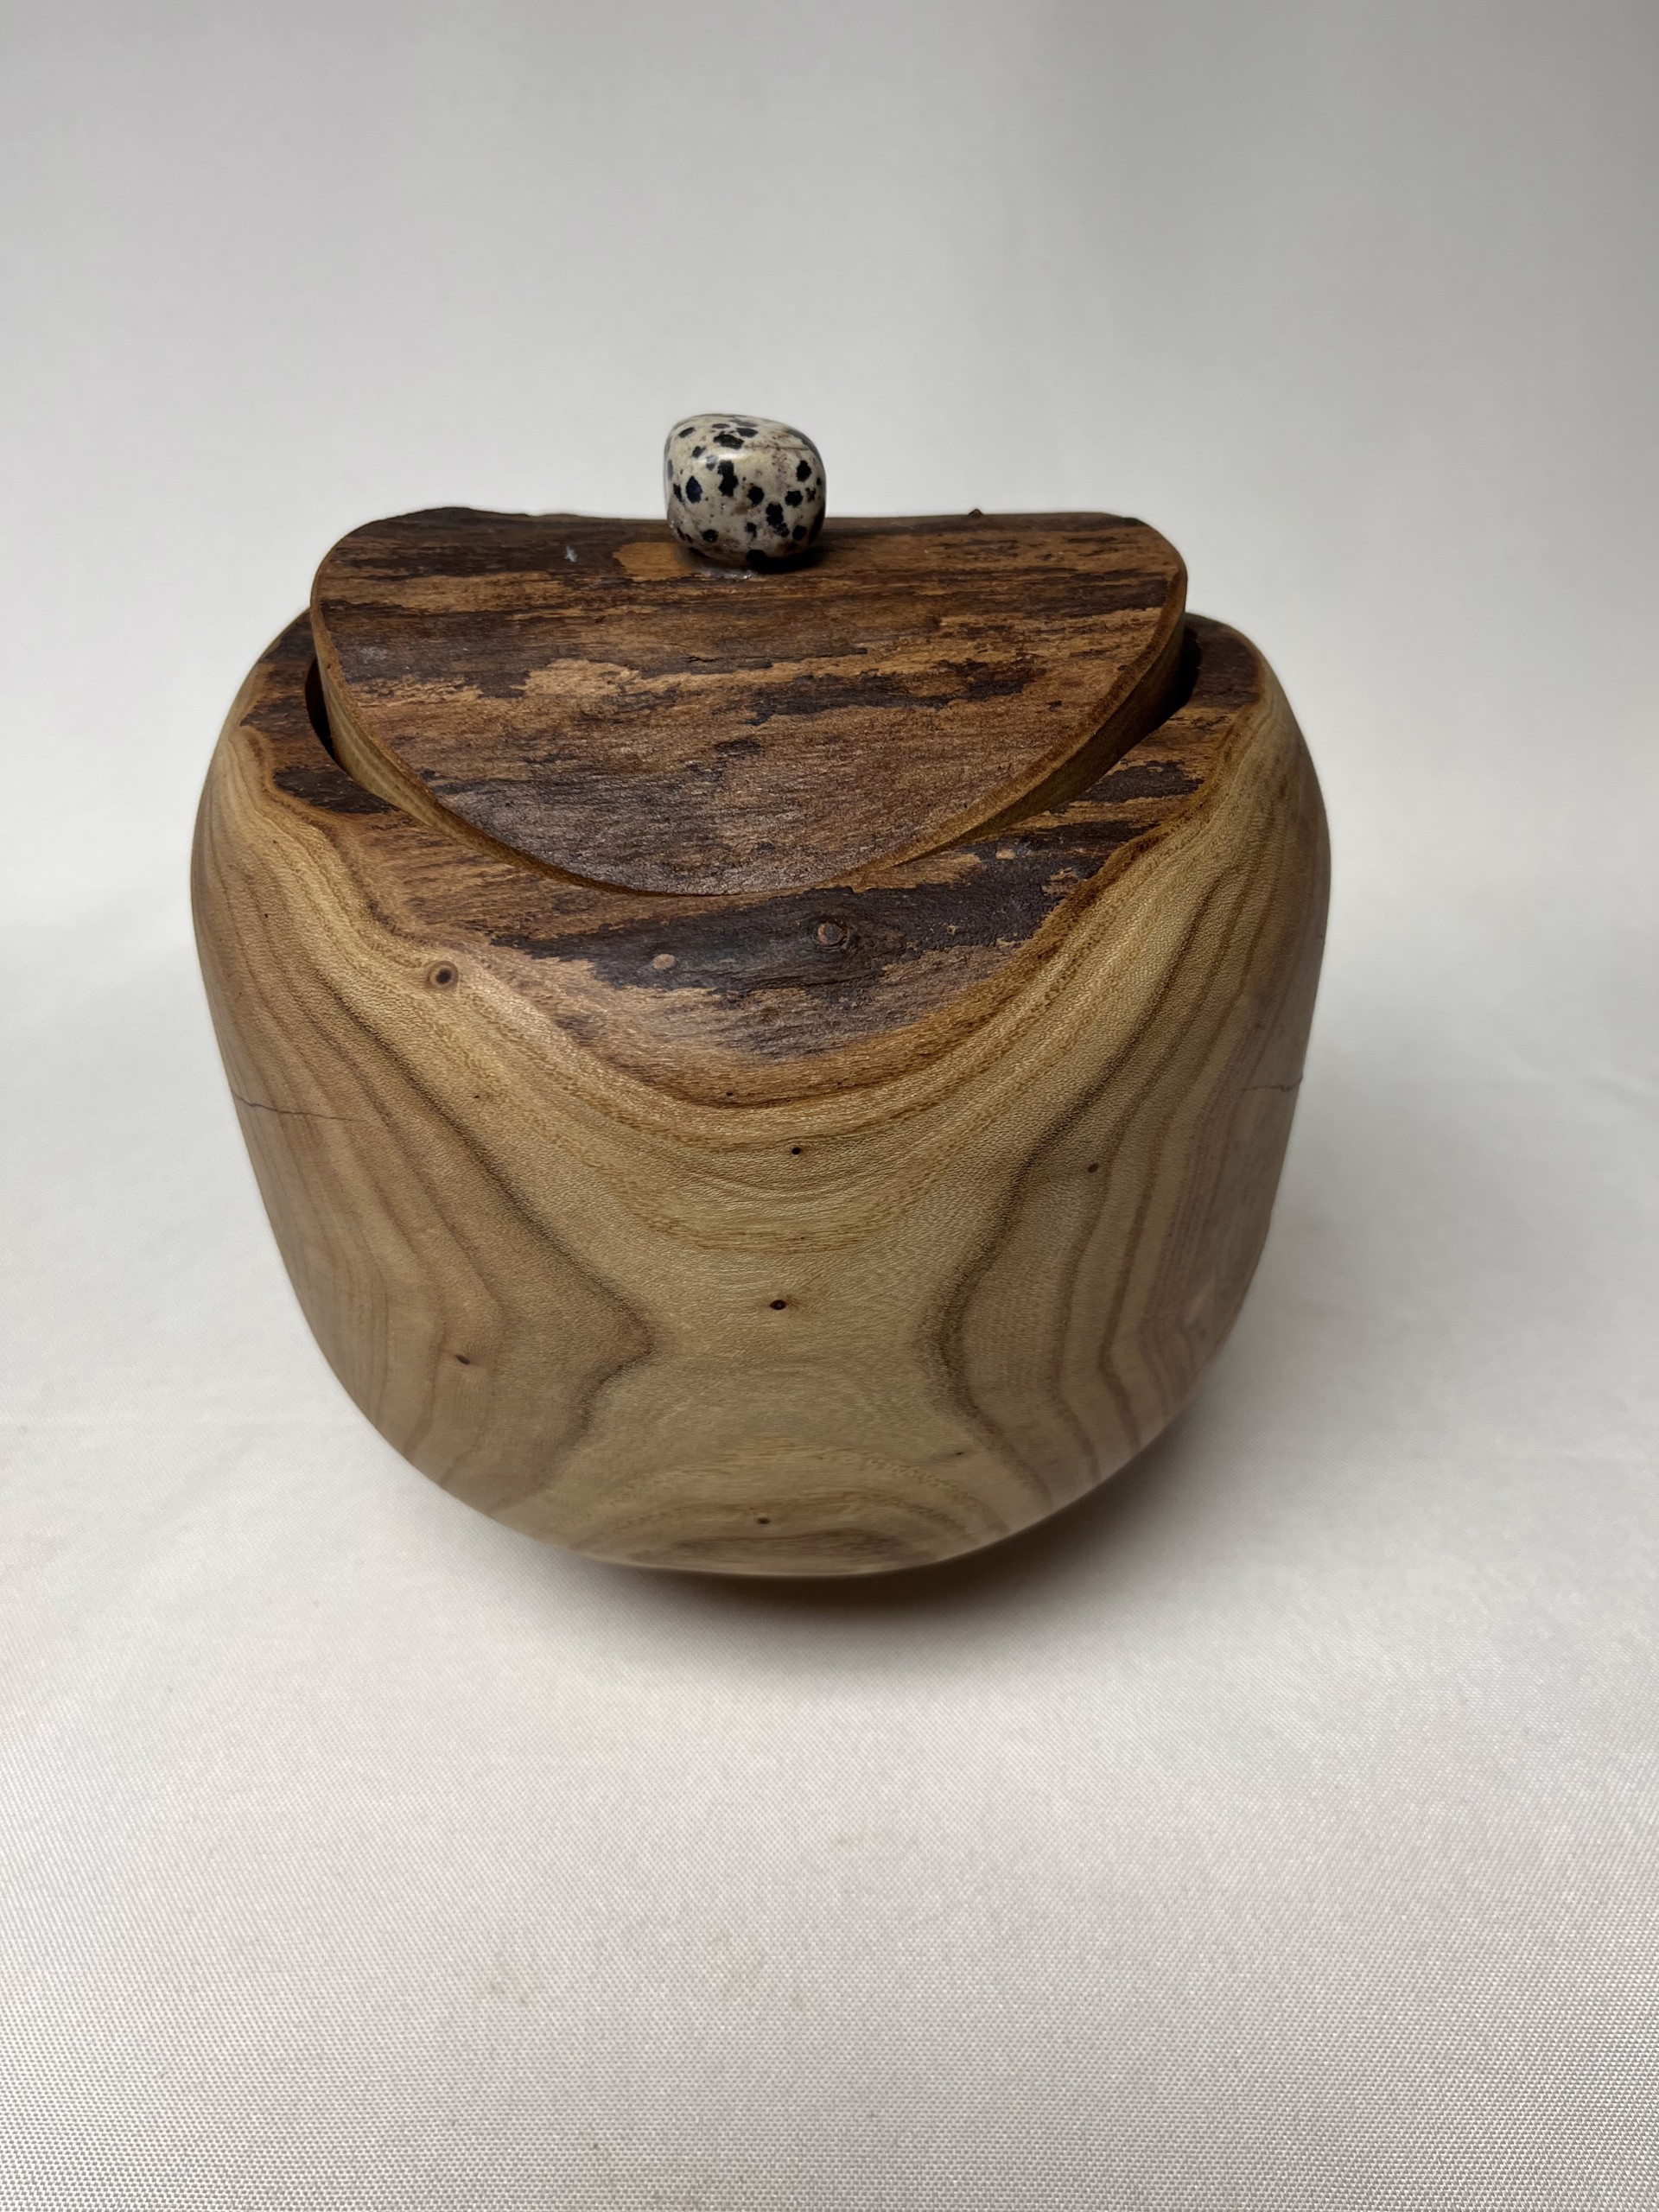 Turned Wood Jar W/Lid #22-38 by Rick Squires